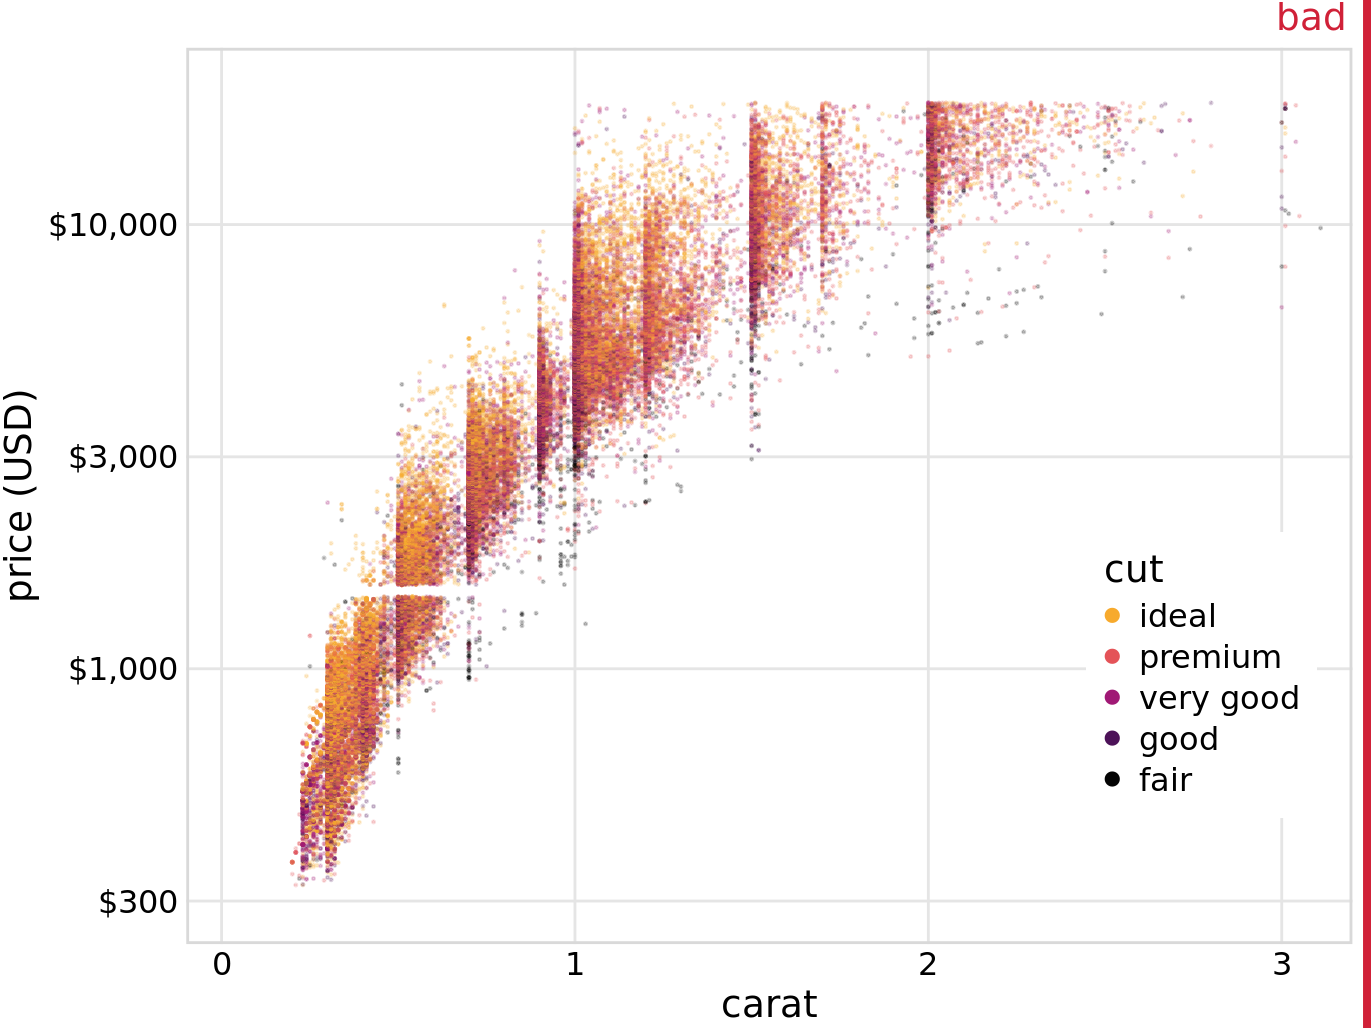 Price of diamonds versus their carat value, for 53,940 individual diamonds. Each diamond’s cut is indicated by color. The plot is labeled as “bad” because the extensive overplotting makes it impossible to discern any patterns among the different diamond cuts. Data source: Hadley Wickham, ggplot2